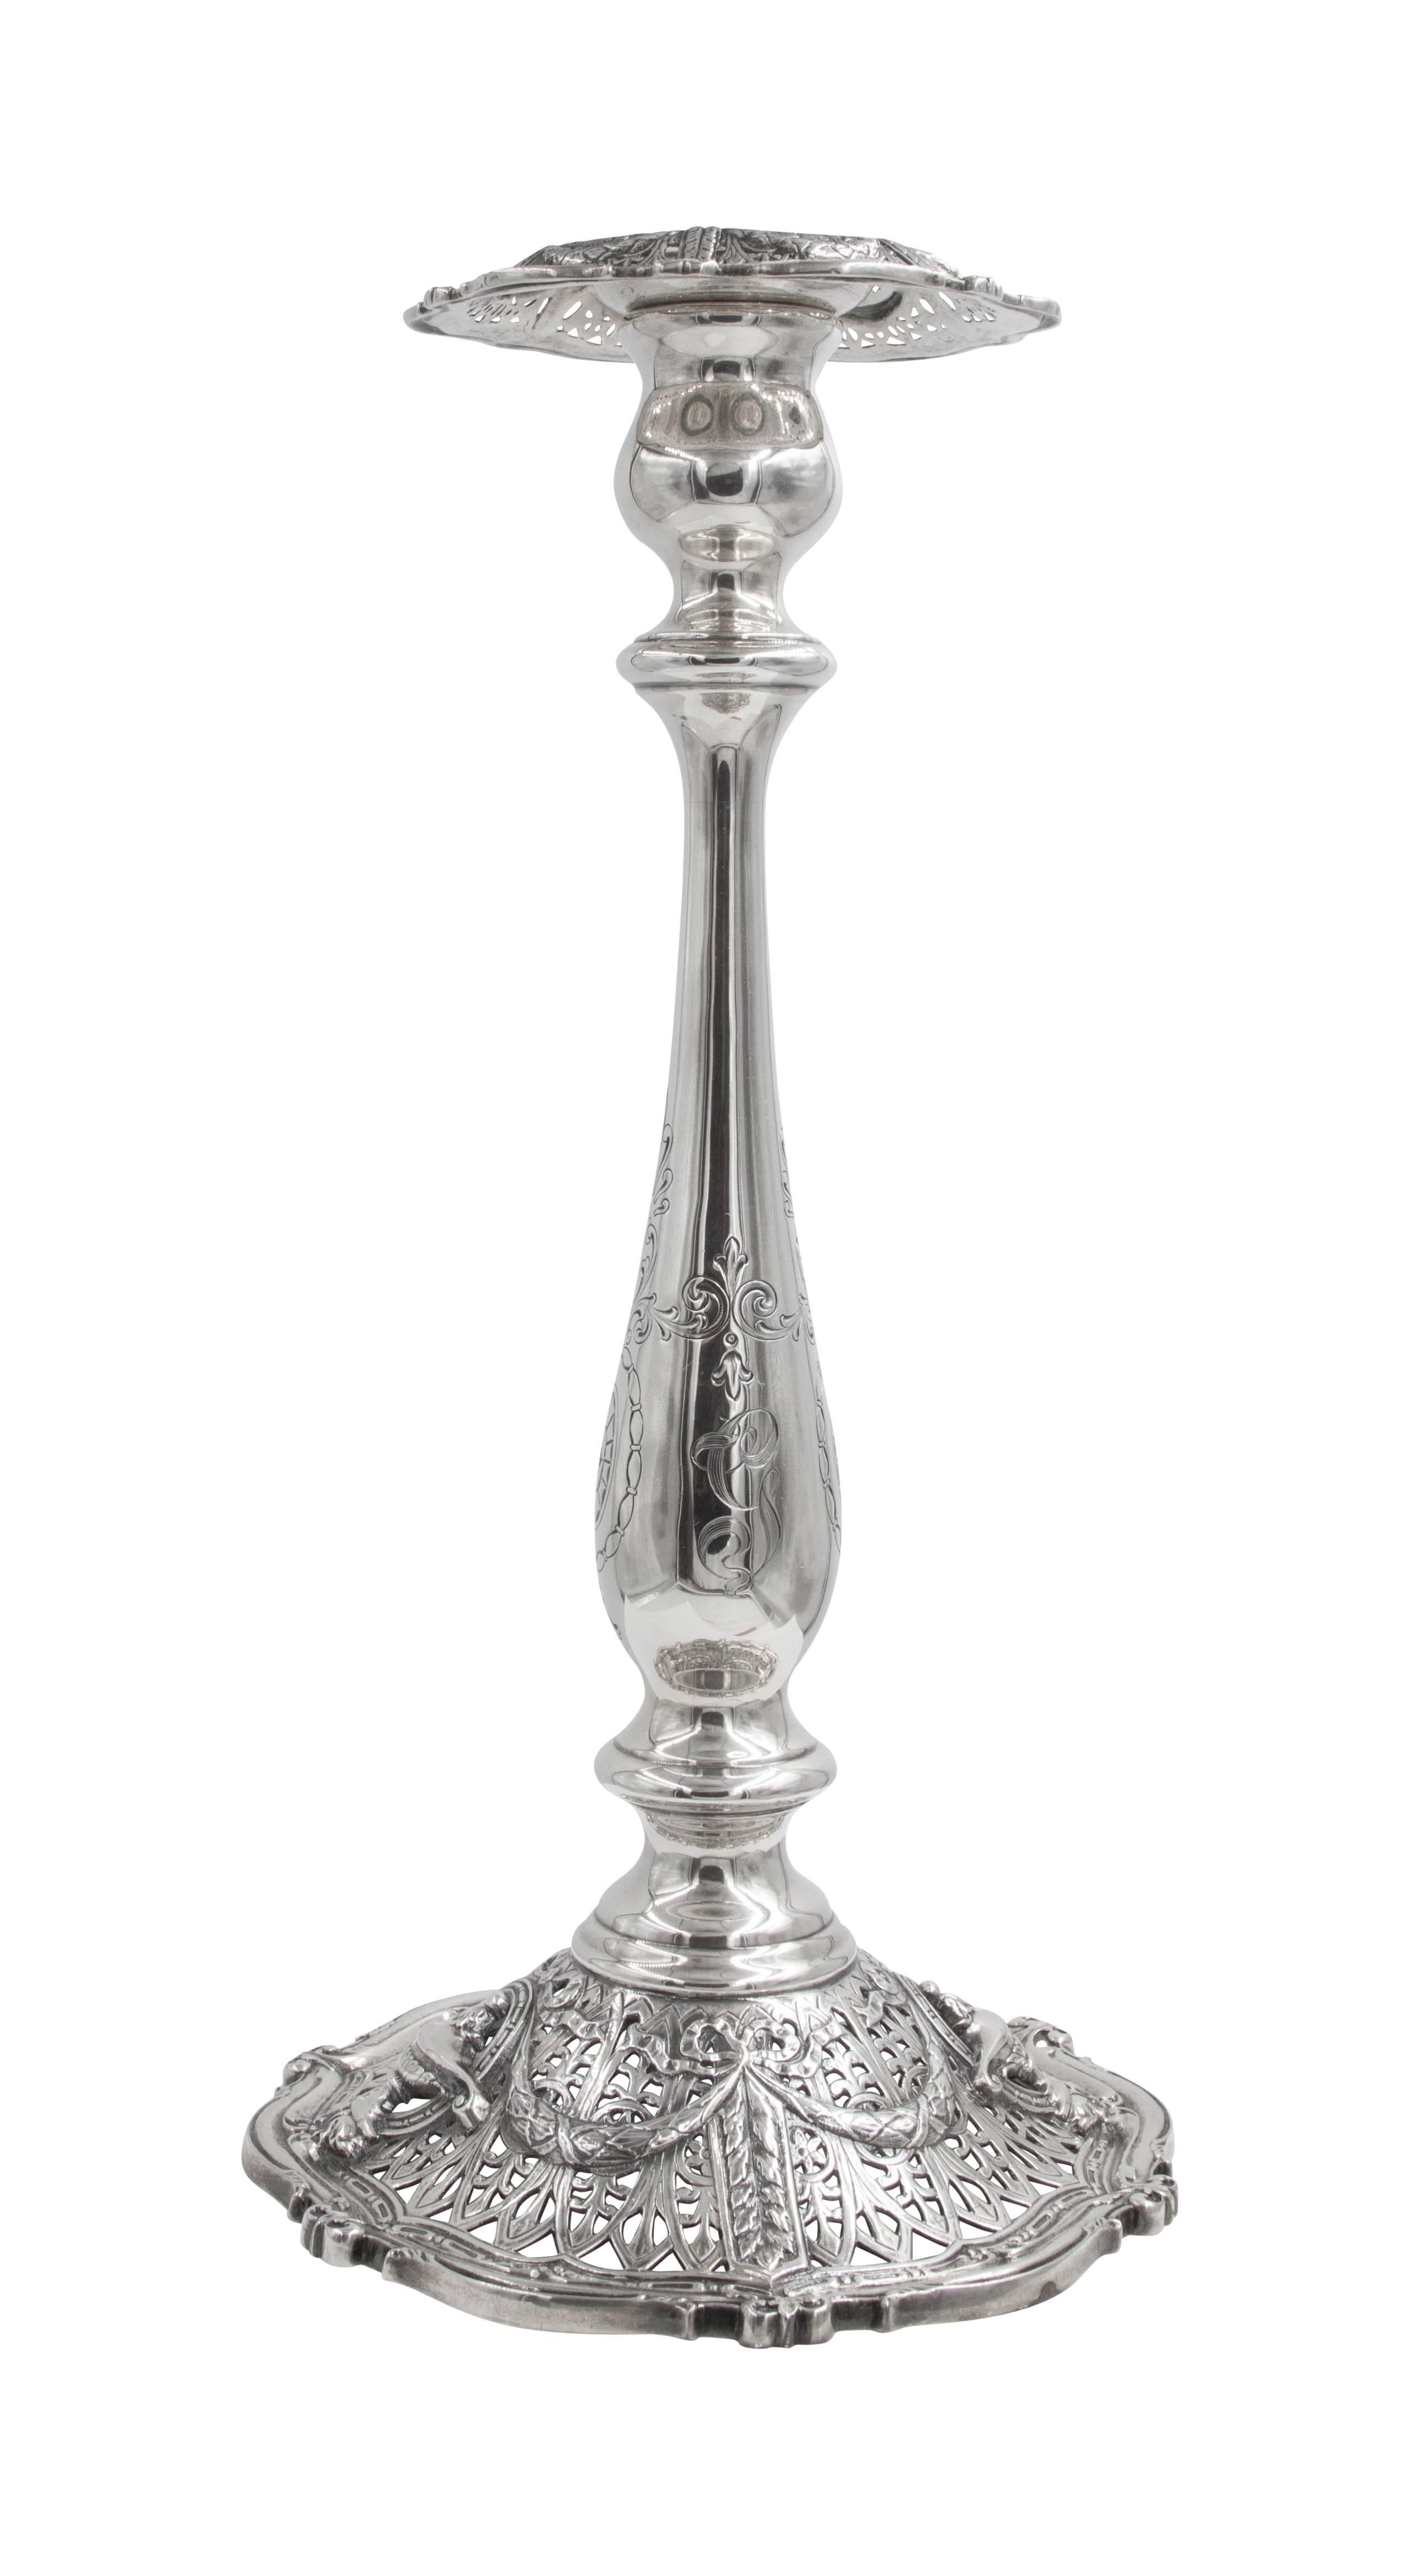 Old world grace and elegance are yours for the taking with this magnificent pair of vintage silver candlesticks. Delicate floral engraving along the base and stem lend a majestic feel to these extraordinary statement pieces. A unique expression of